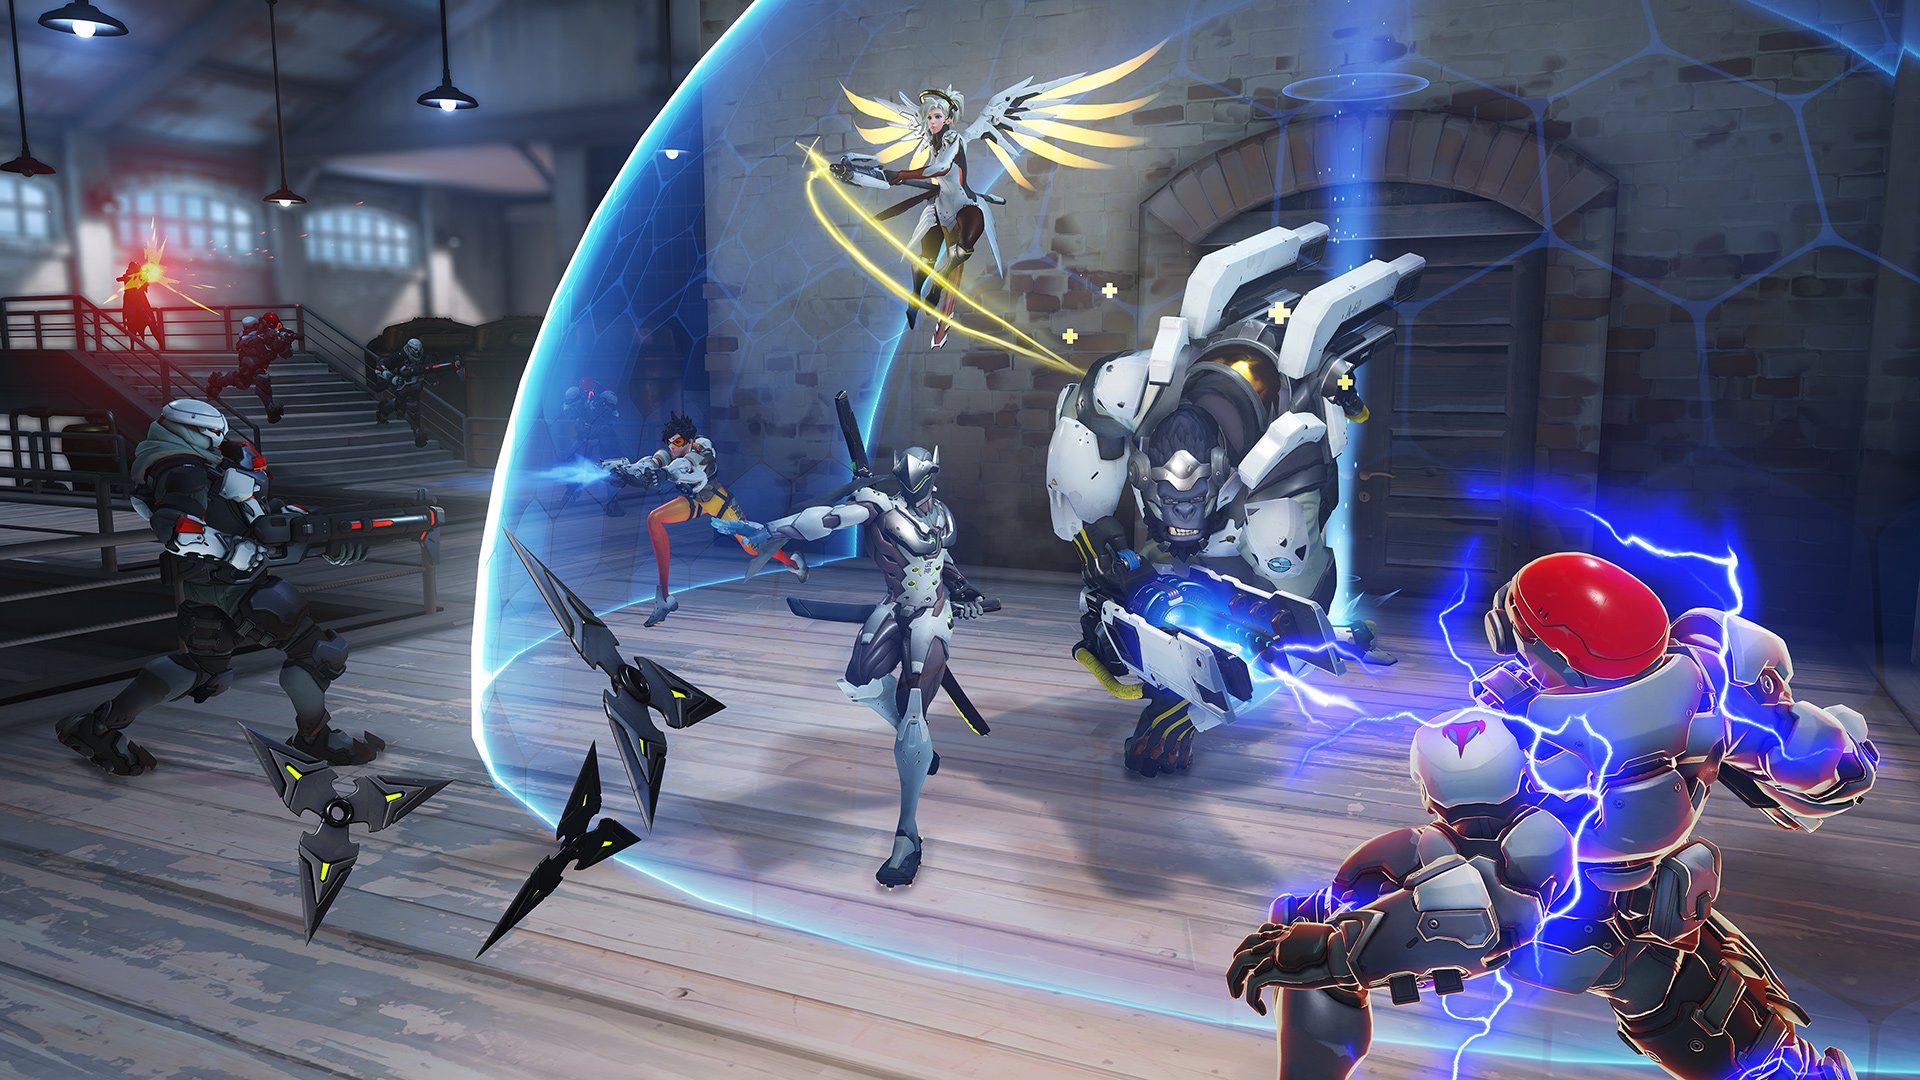 Overwatch event Storm Rising assembles Tracer, Mercy, Winston, and